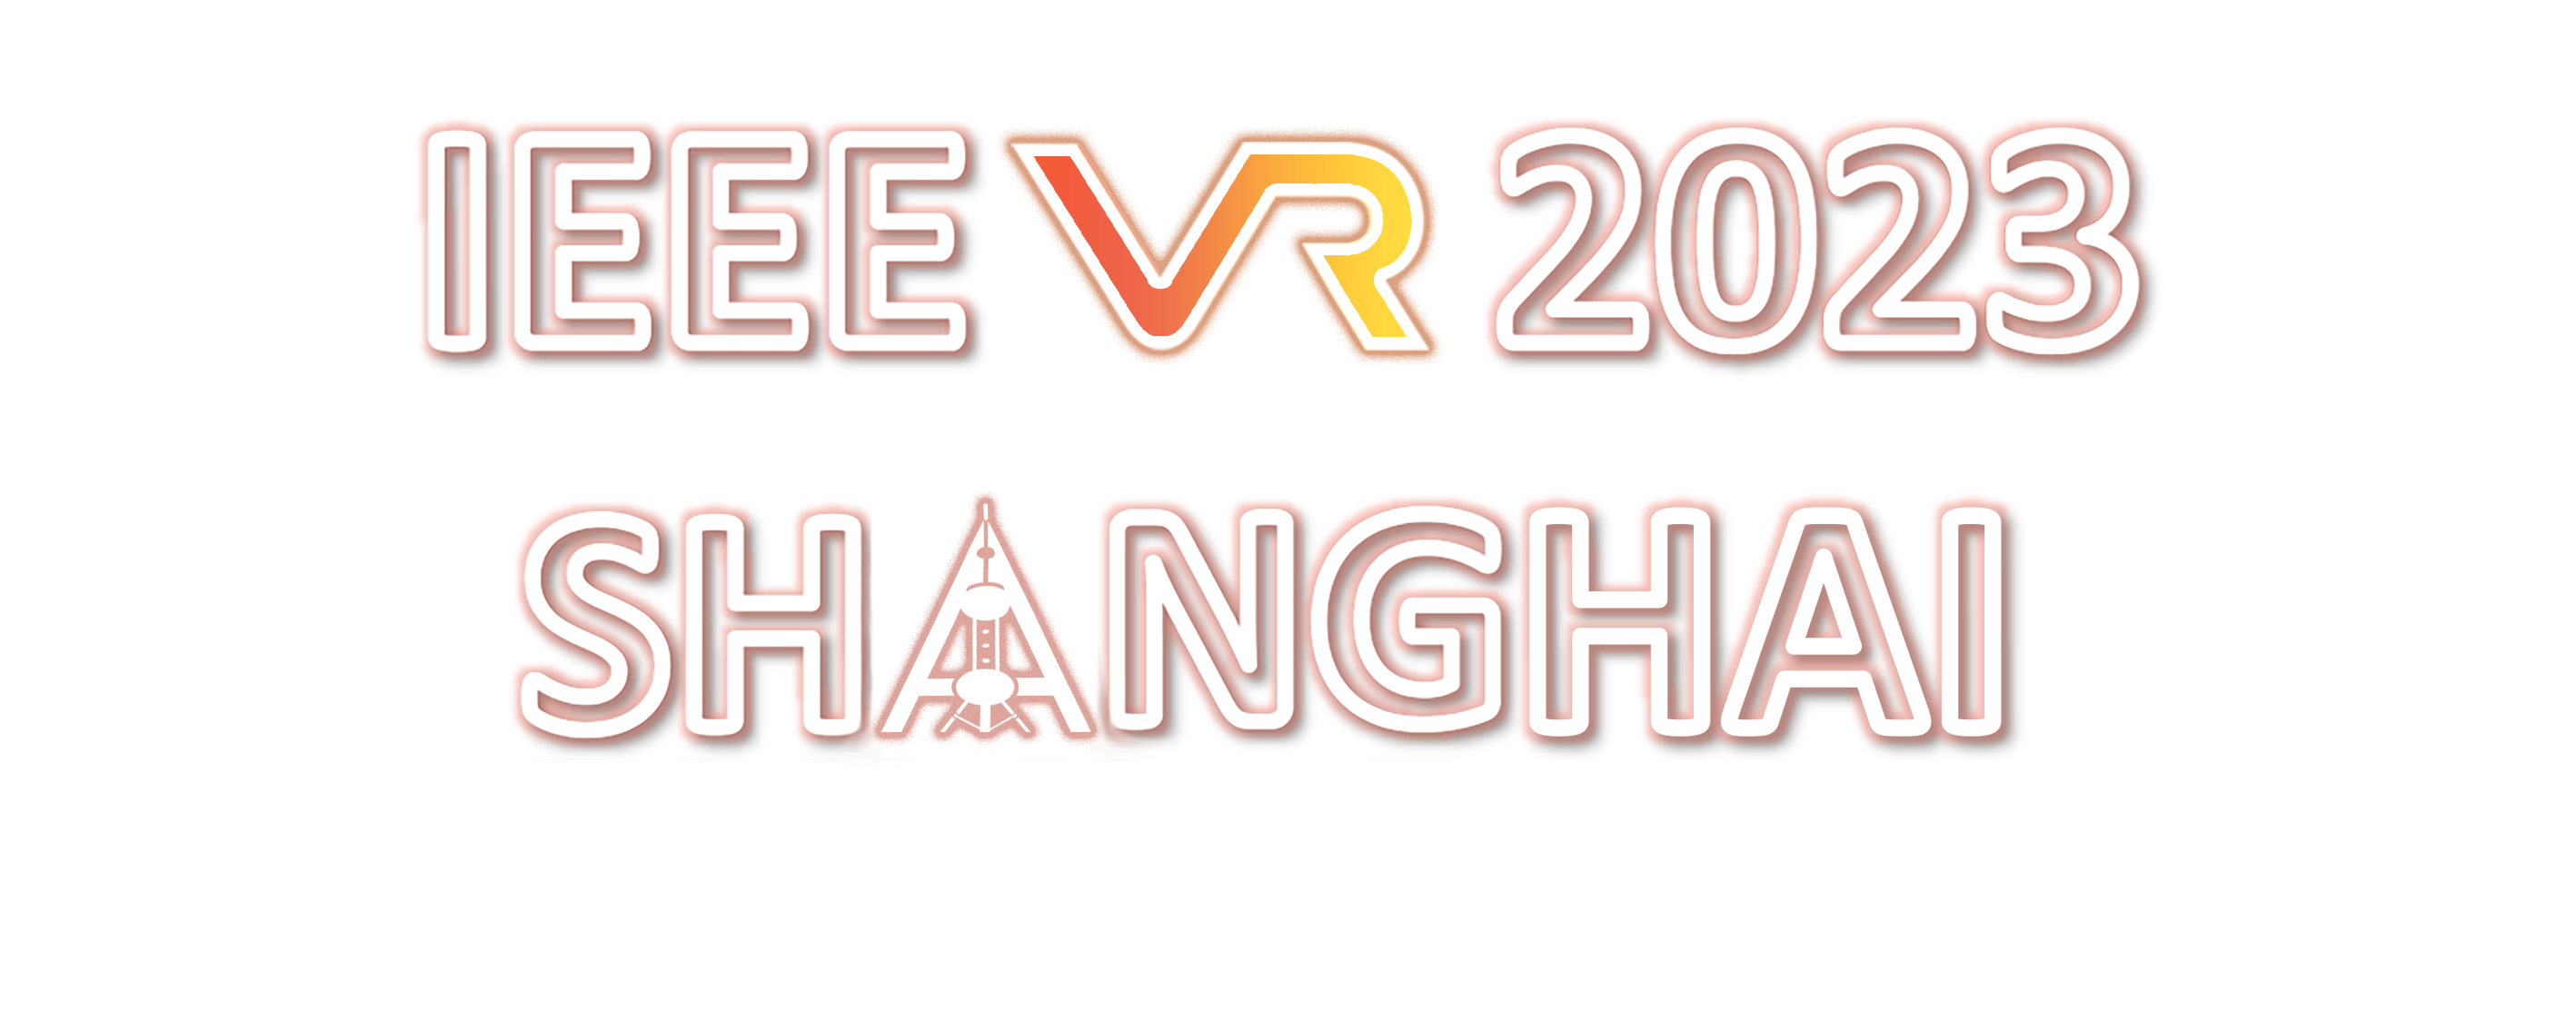 The IEEE VR 2023 logo.